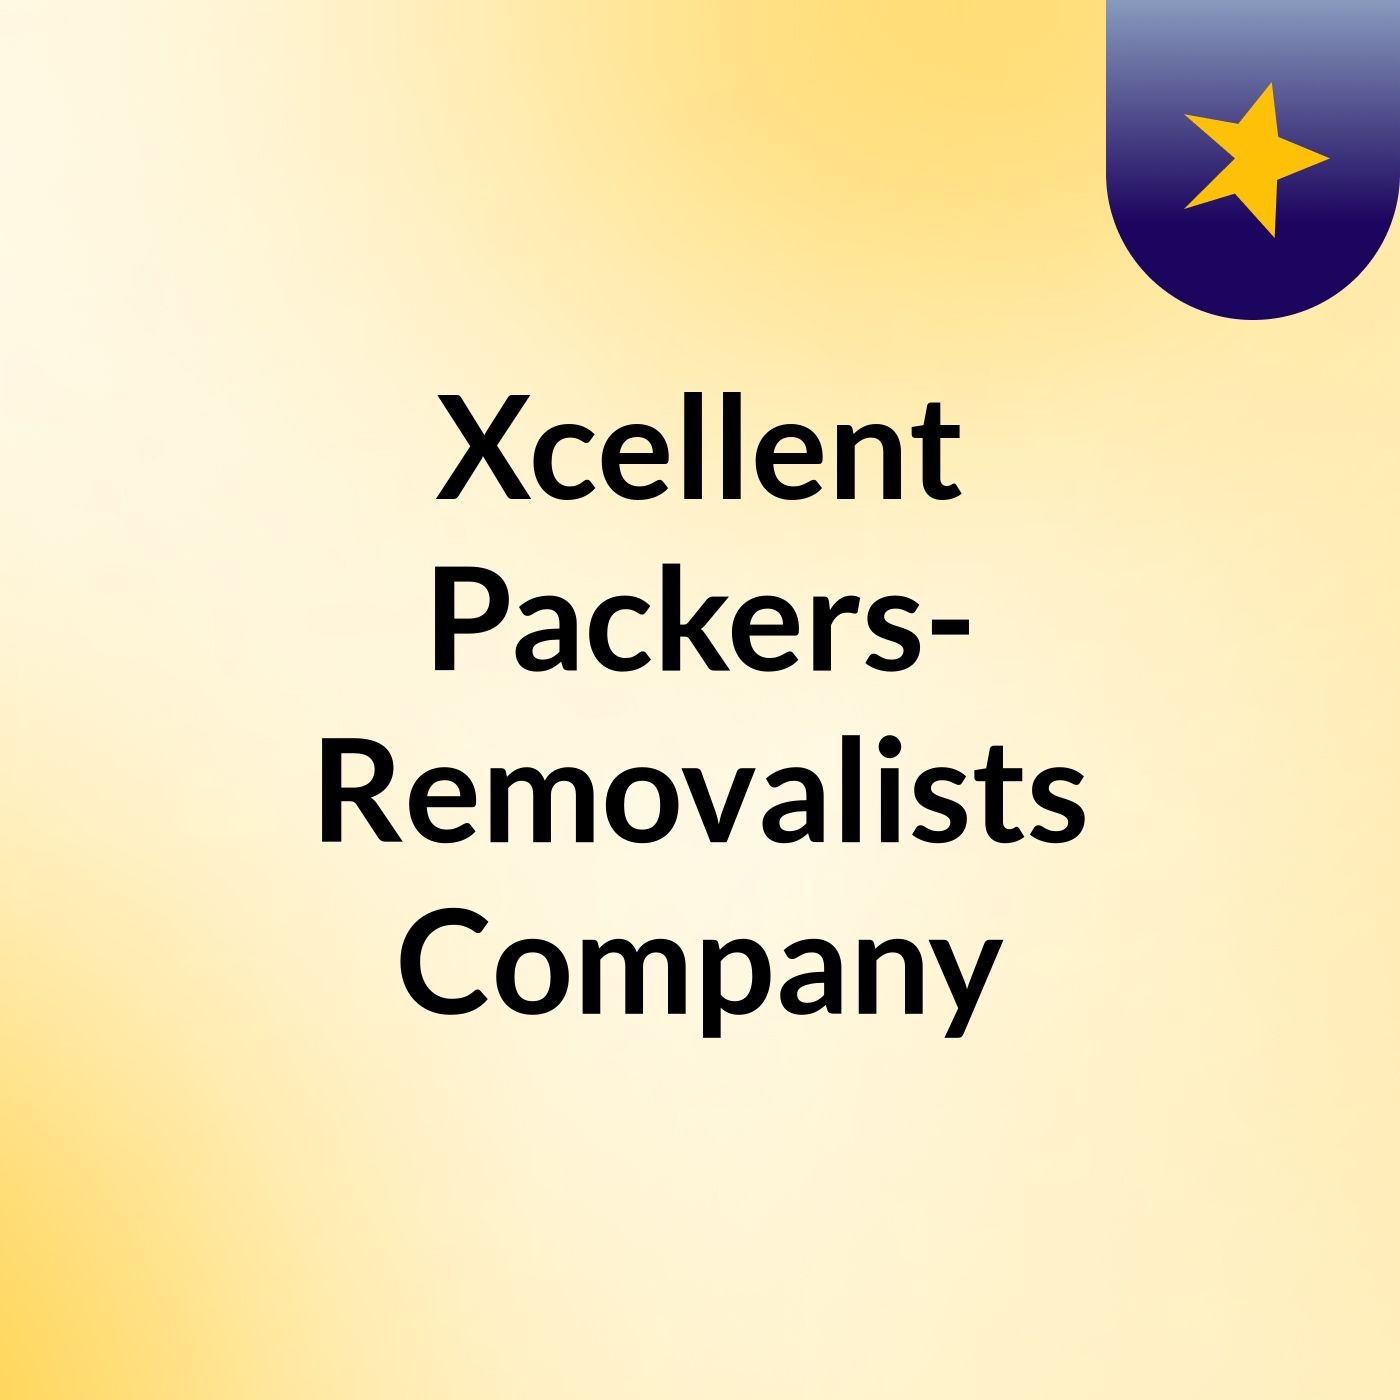 Xcellent Packers- Removalists Company